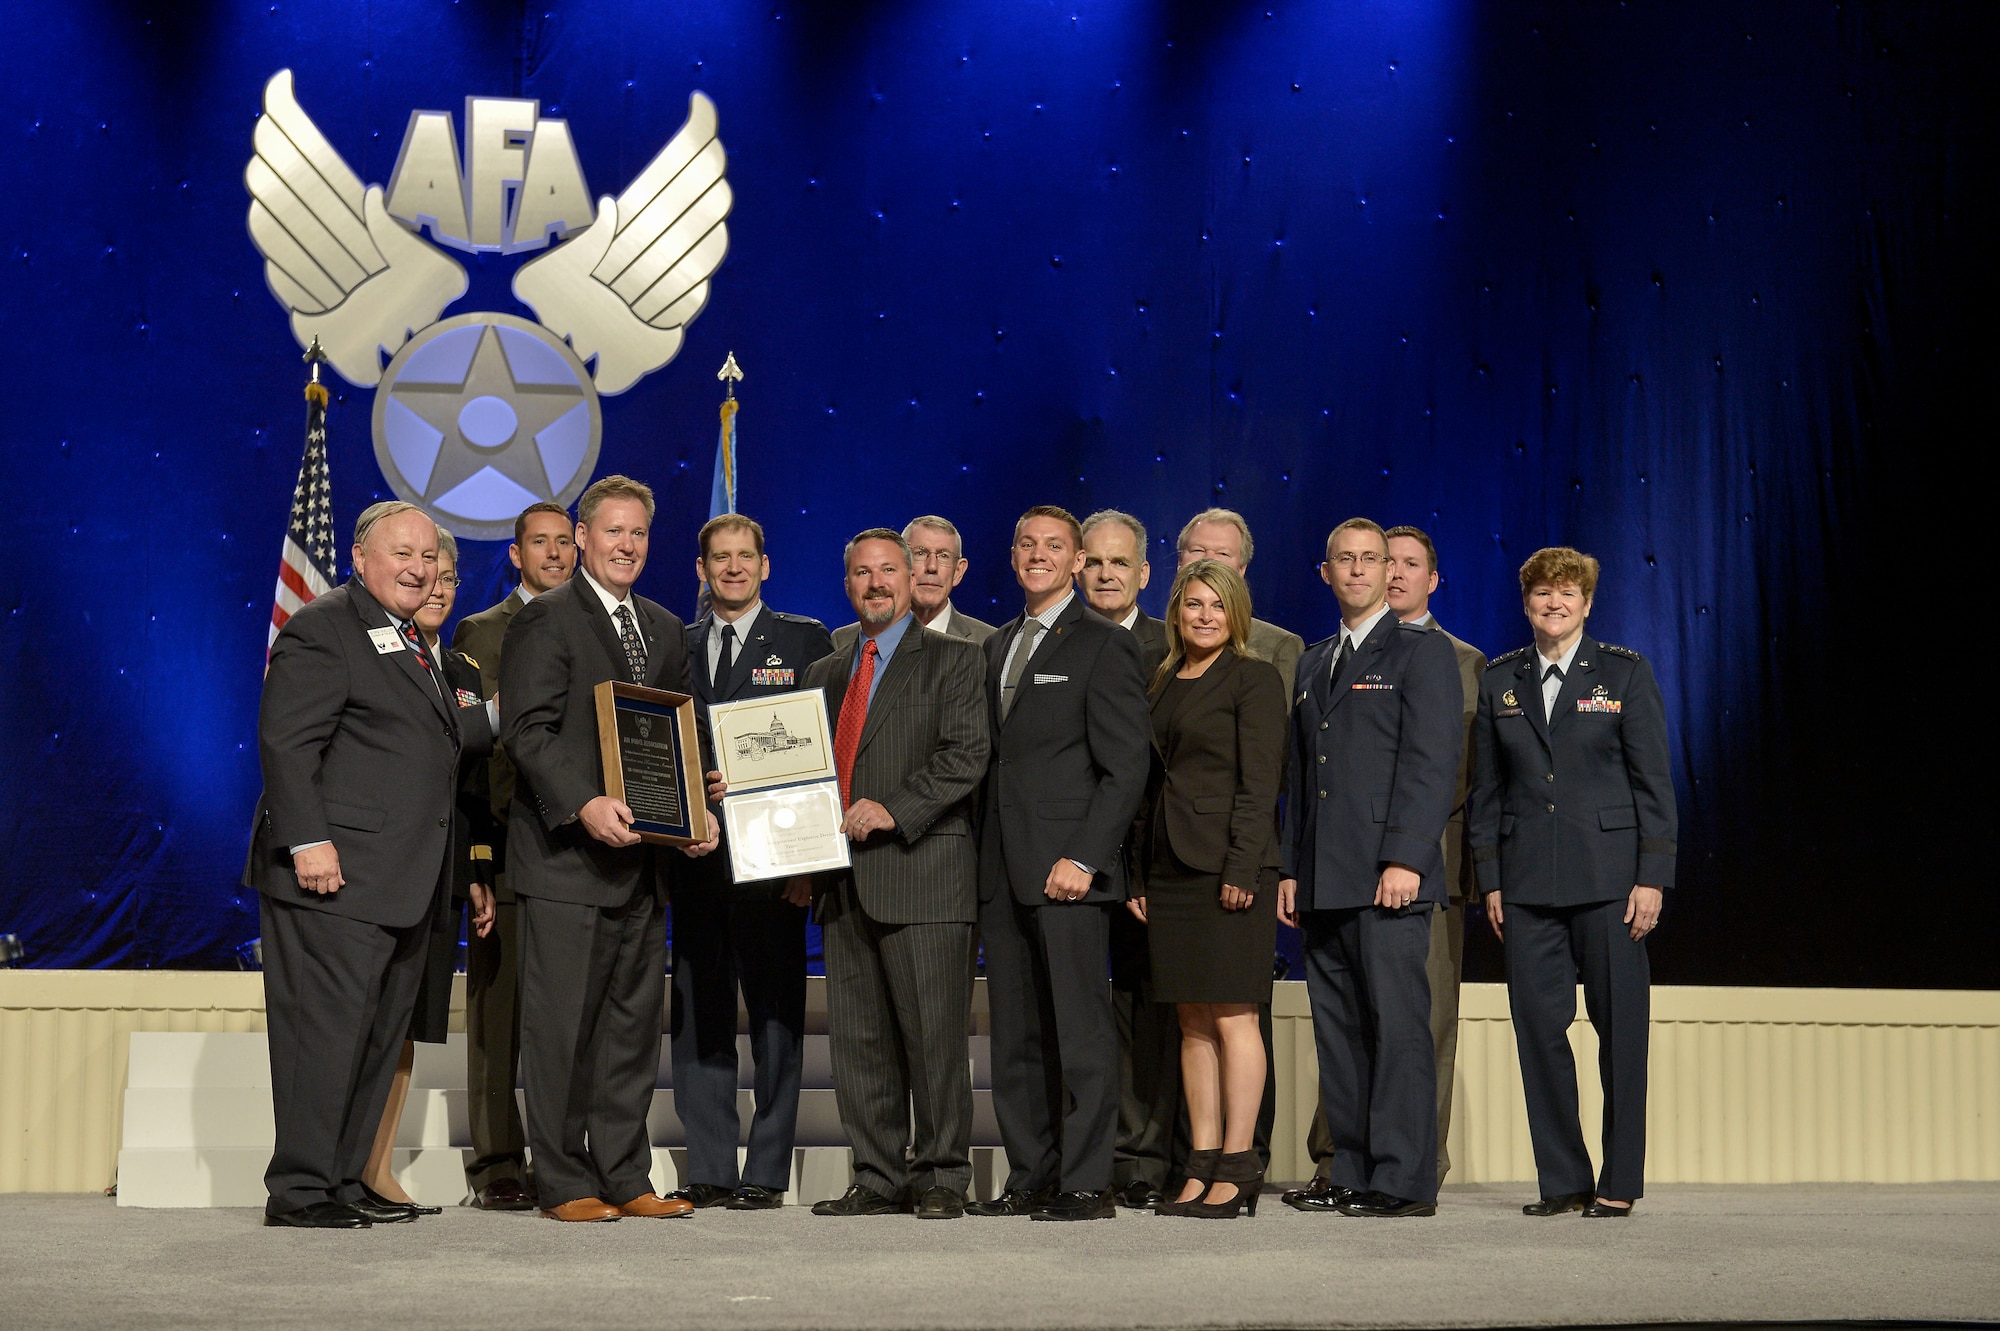 Members of the Counter-Improvised Explosive Device team from Hanscom Air Force Base, Mass., receive the Theodore von Karman Award during the 2014 Air Force Association's Air and Space Conference Award Ceremony in National Harbor, Md., Sept 15. On stage hoding a certificate is U.S. Air Force Maj. Tim Helfrich, a military Congressional fellow assigned to the office of Rep. Niki Tsongas (MA-D) office and Gen. Janet Wolfenbarger, far right, Air Force Life Cycle Management Center commander. The award is given to those who have made significant contributions to national defense in the field of science and engineering. (U.S. Air Force photo by Staff Sgt. Anthony Nelson Jr.)